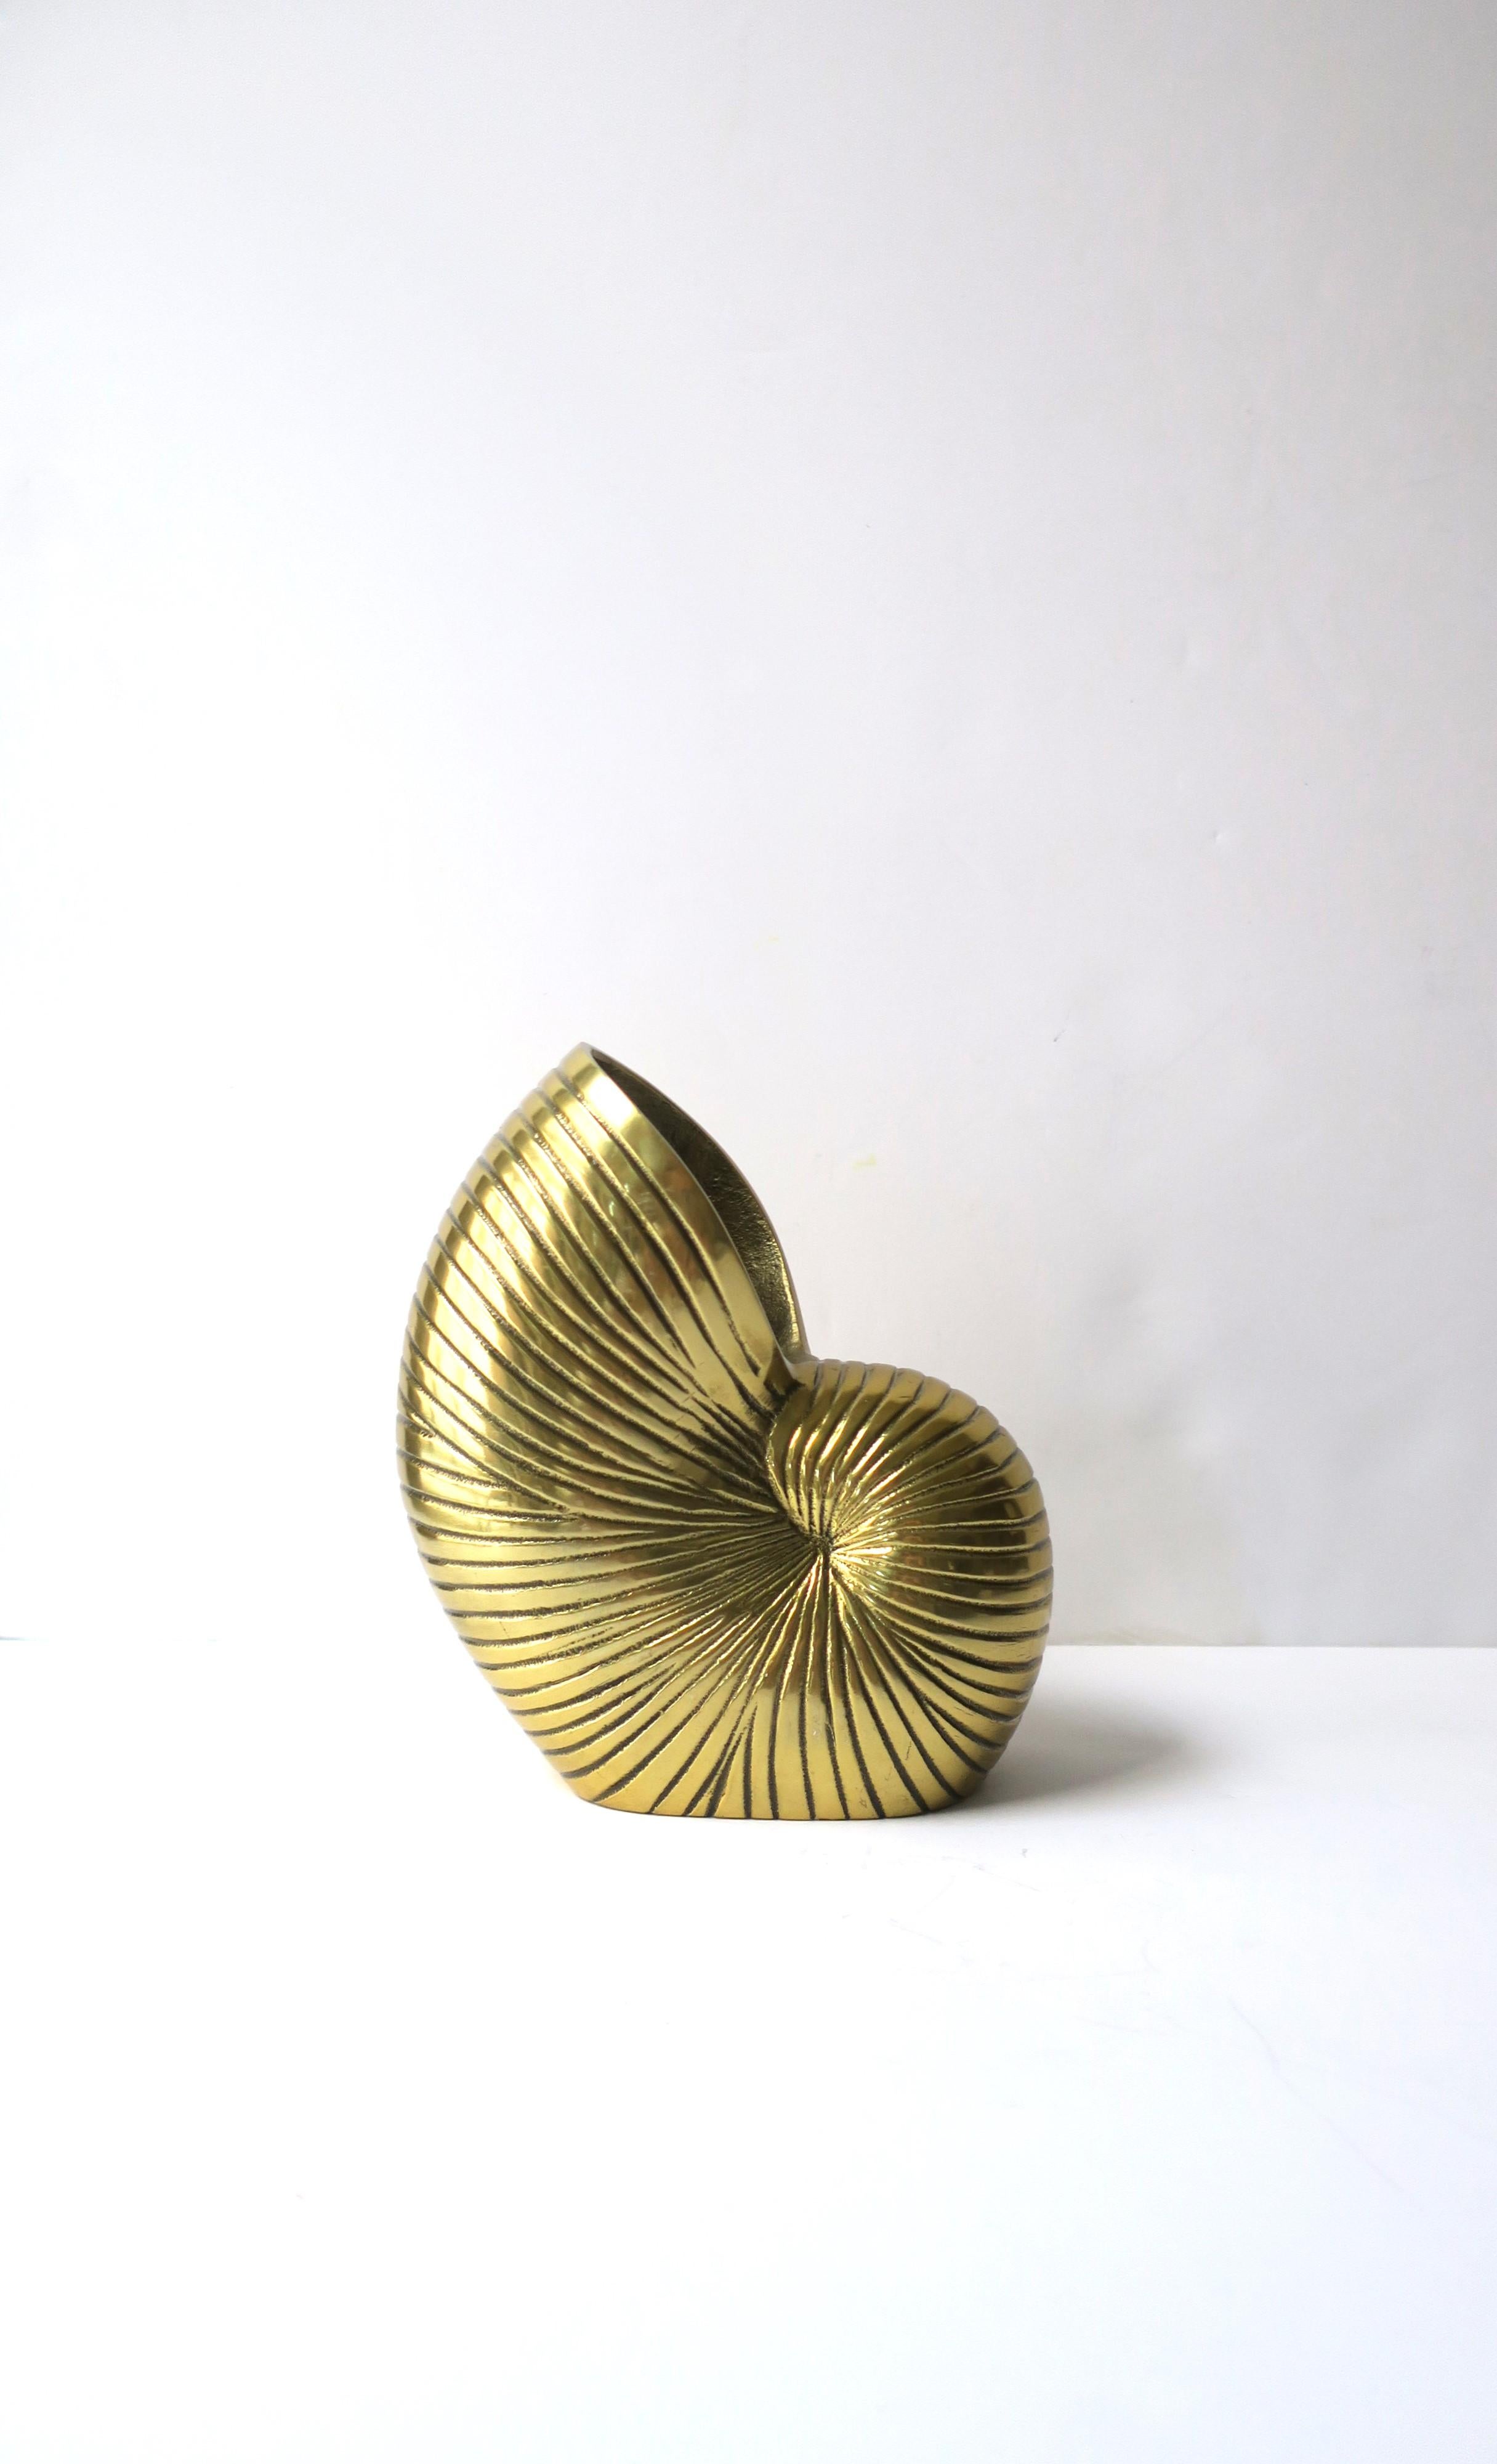 Brass Nautilus Seashell Vase, Planter, or Decorative Object In Excellent Condition For Sale In New York, NY